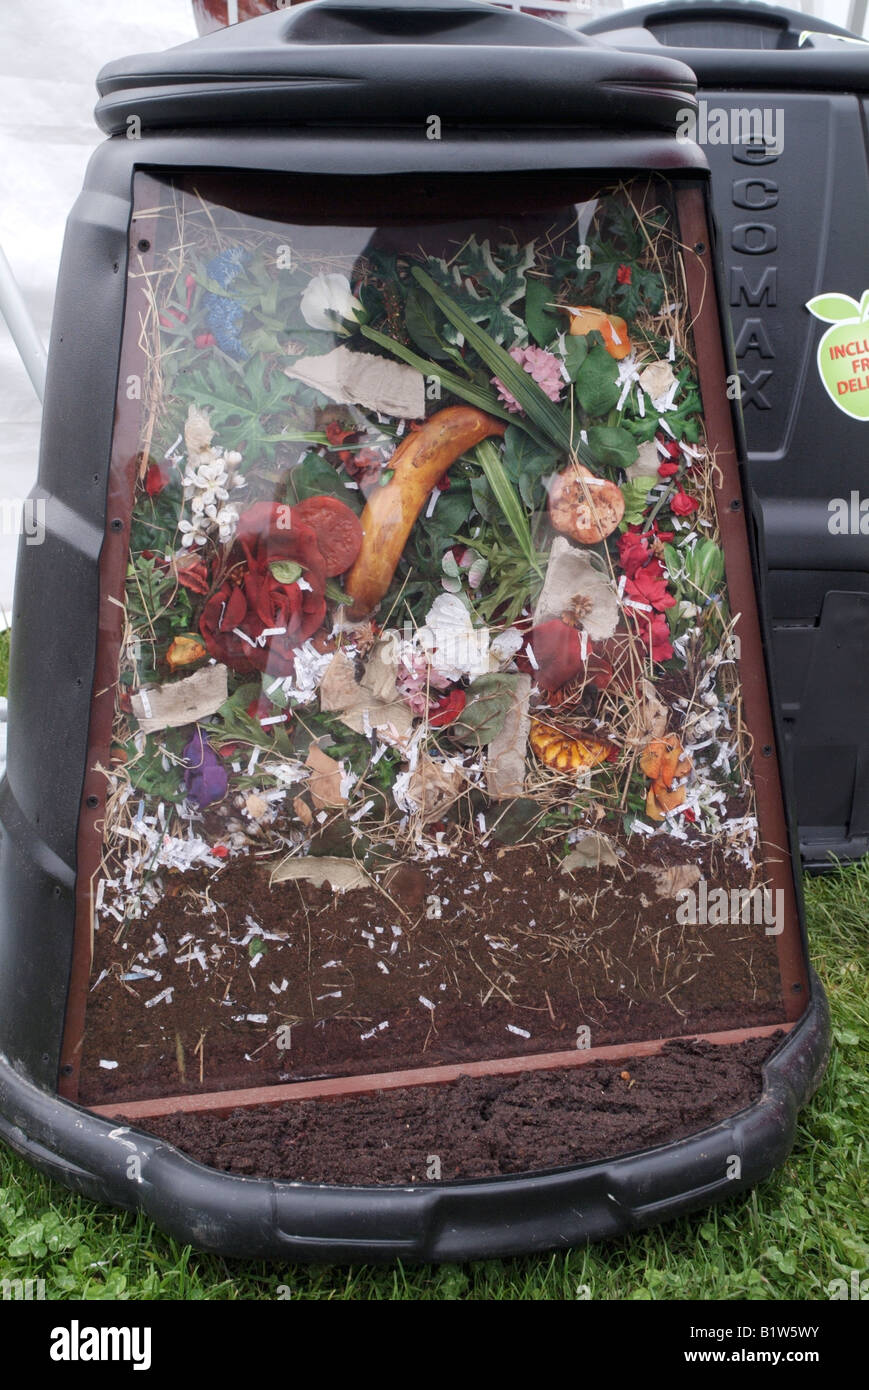 A cut-away compost bin showing how compost is made Stock Photo